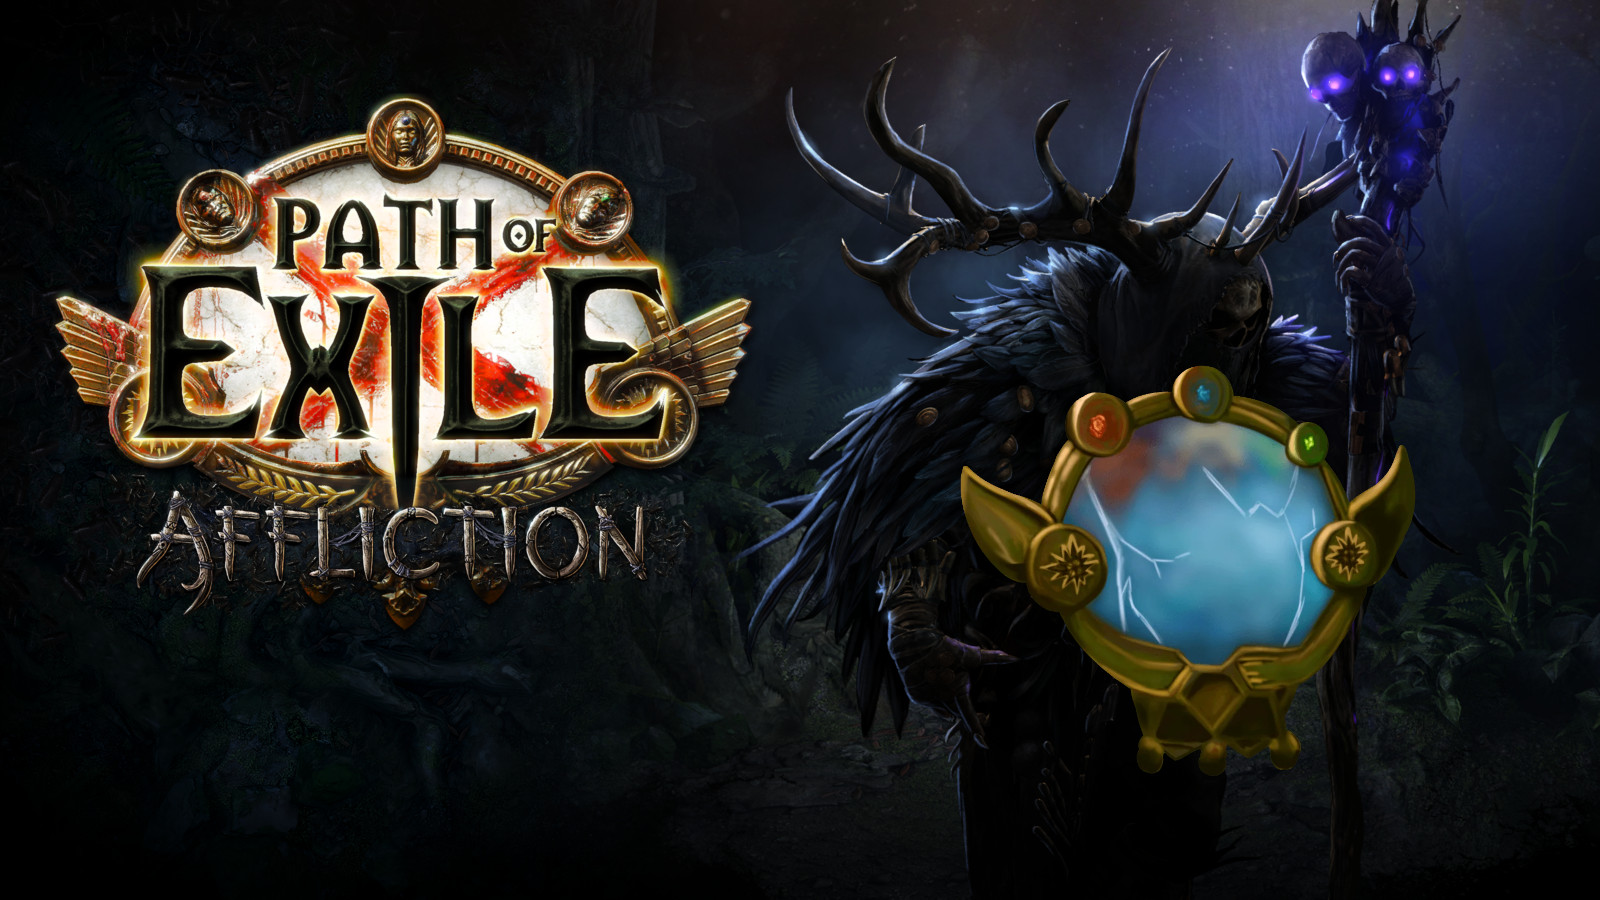 [$ 60.62] Path of Exile Affliction - 1 Mirror of Kalandra - PC